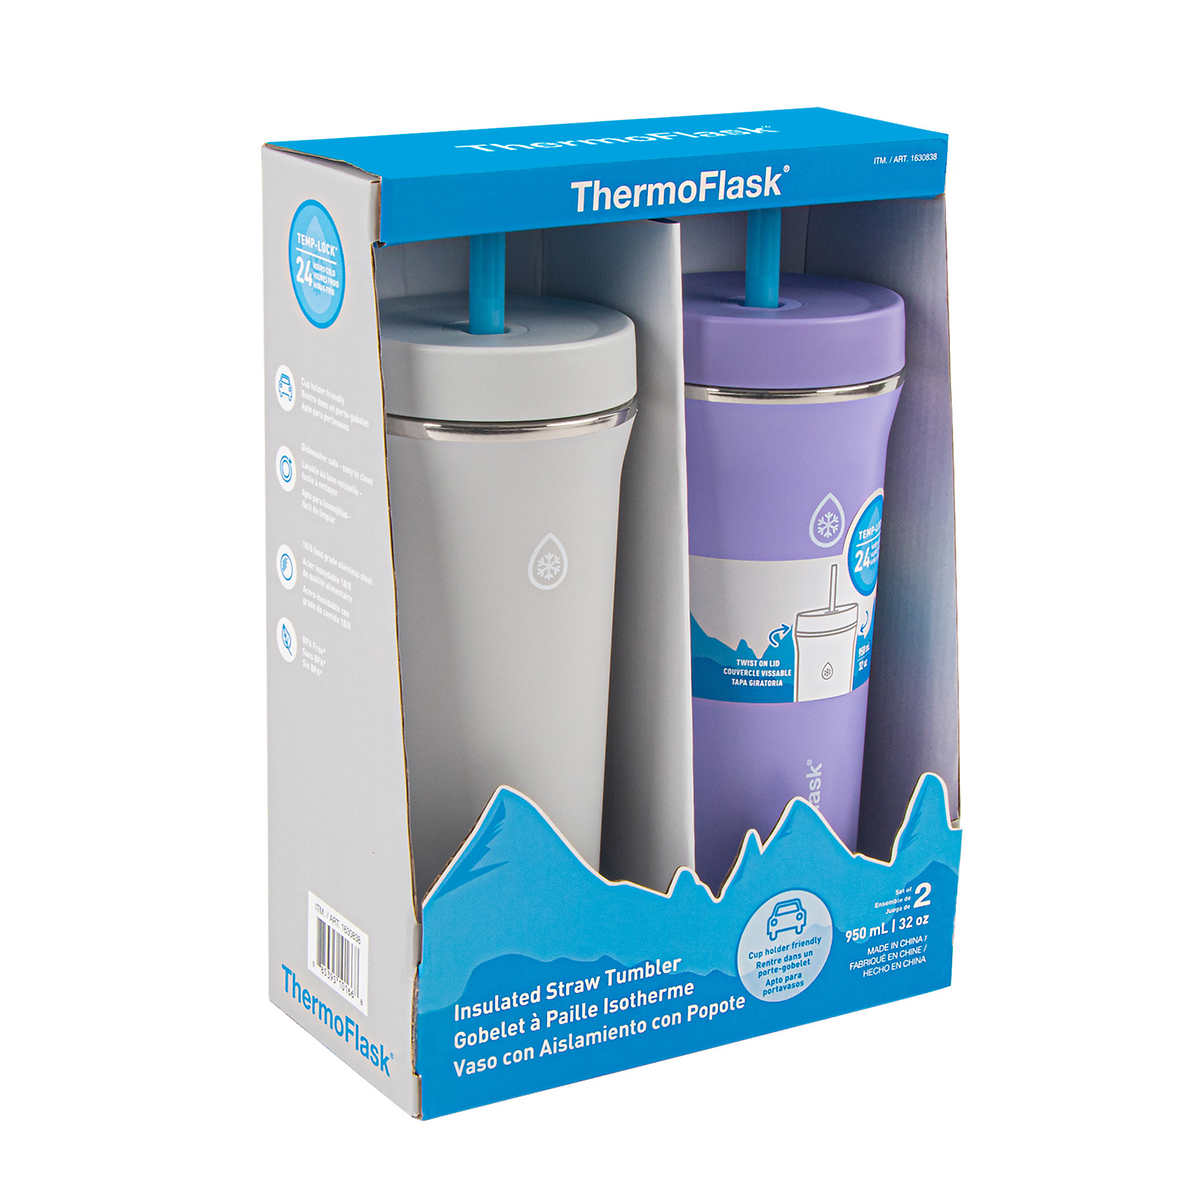 Thermoflask Double Wall Vacuum Insulated Stainless Steel 2-Pack of